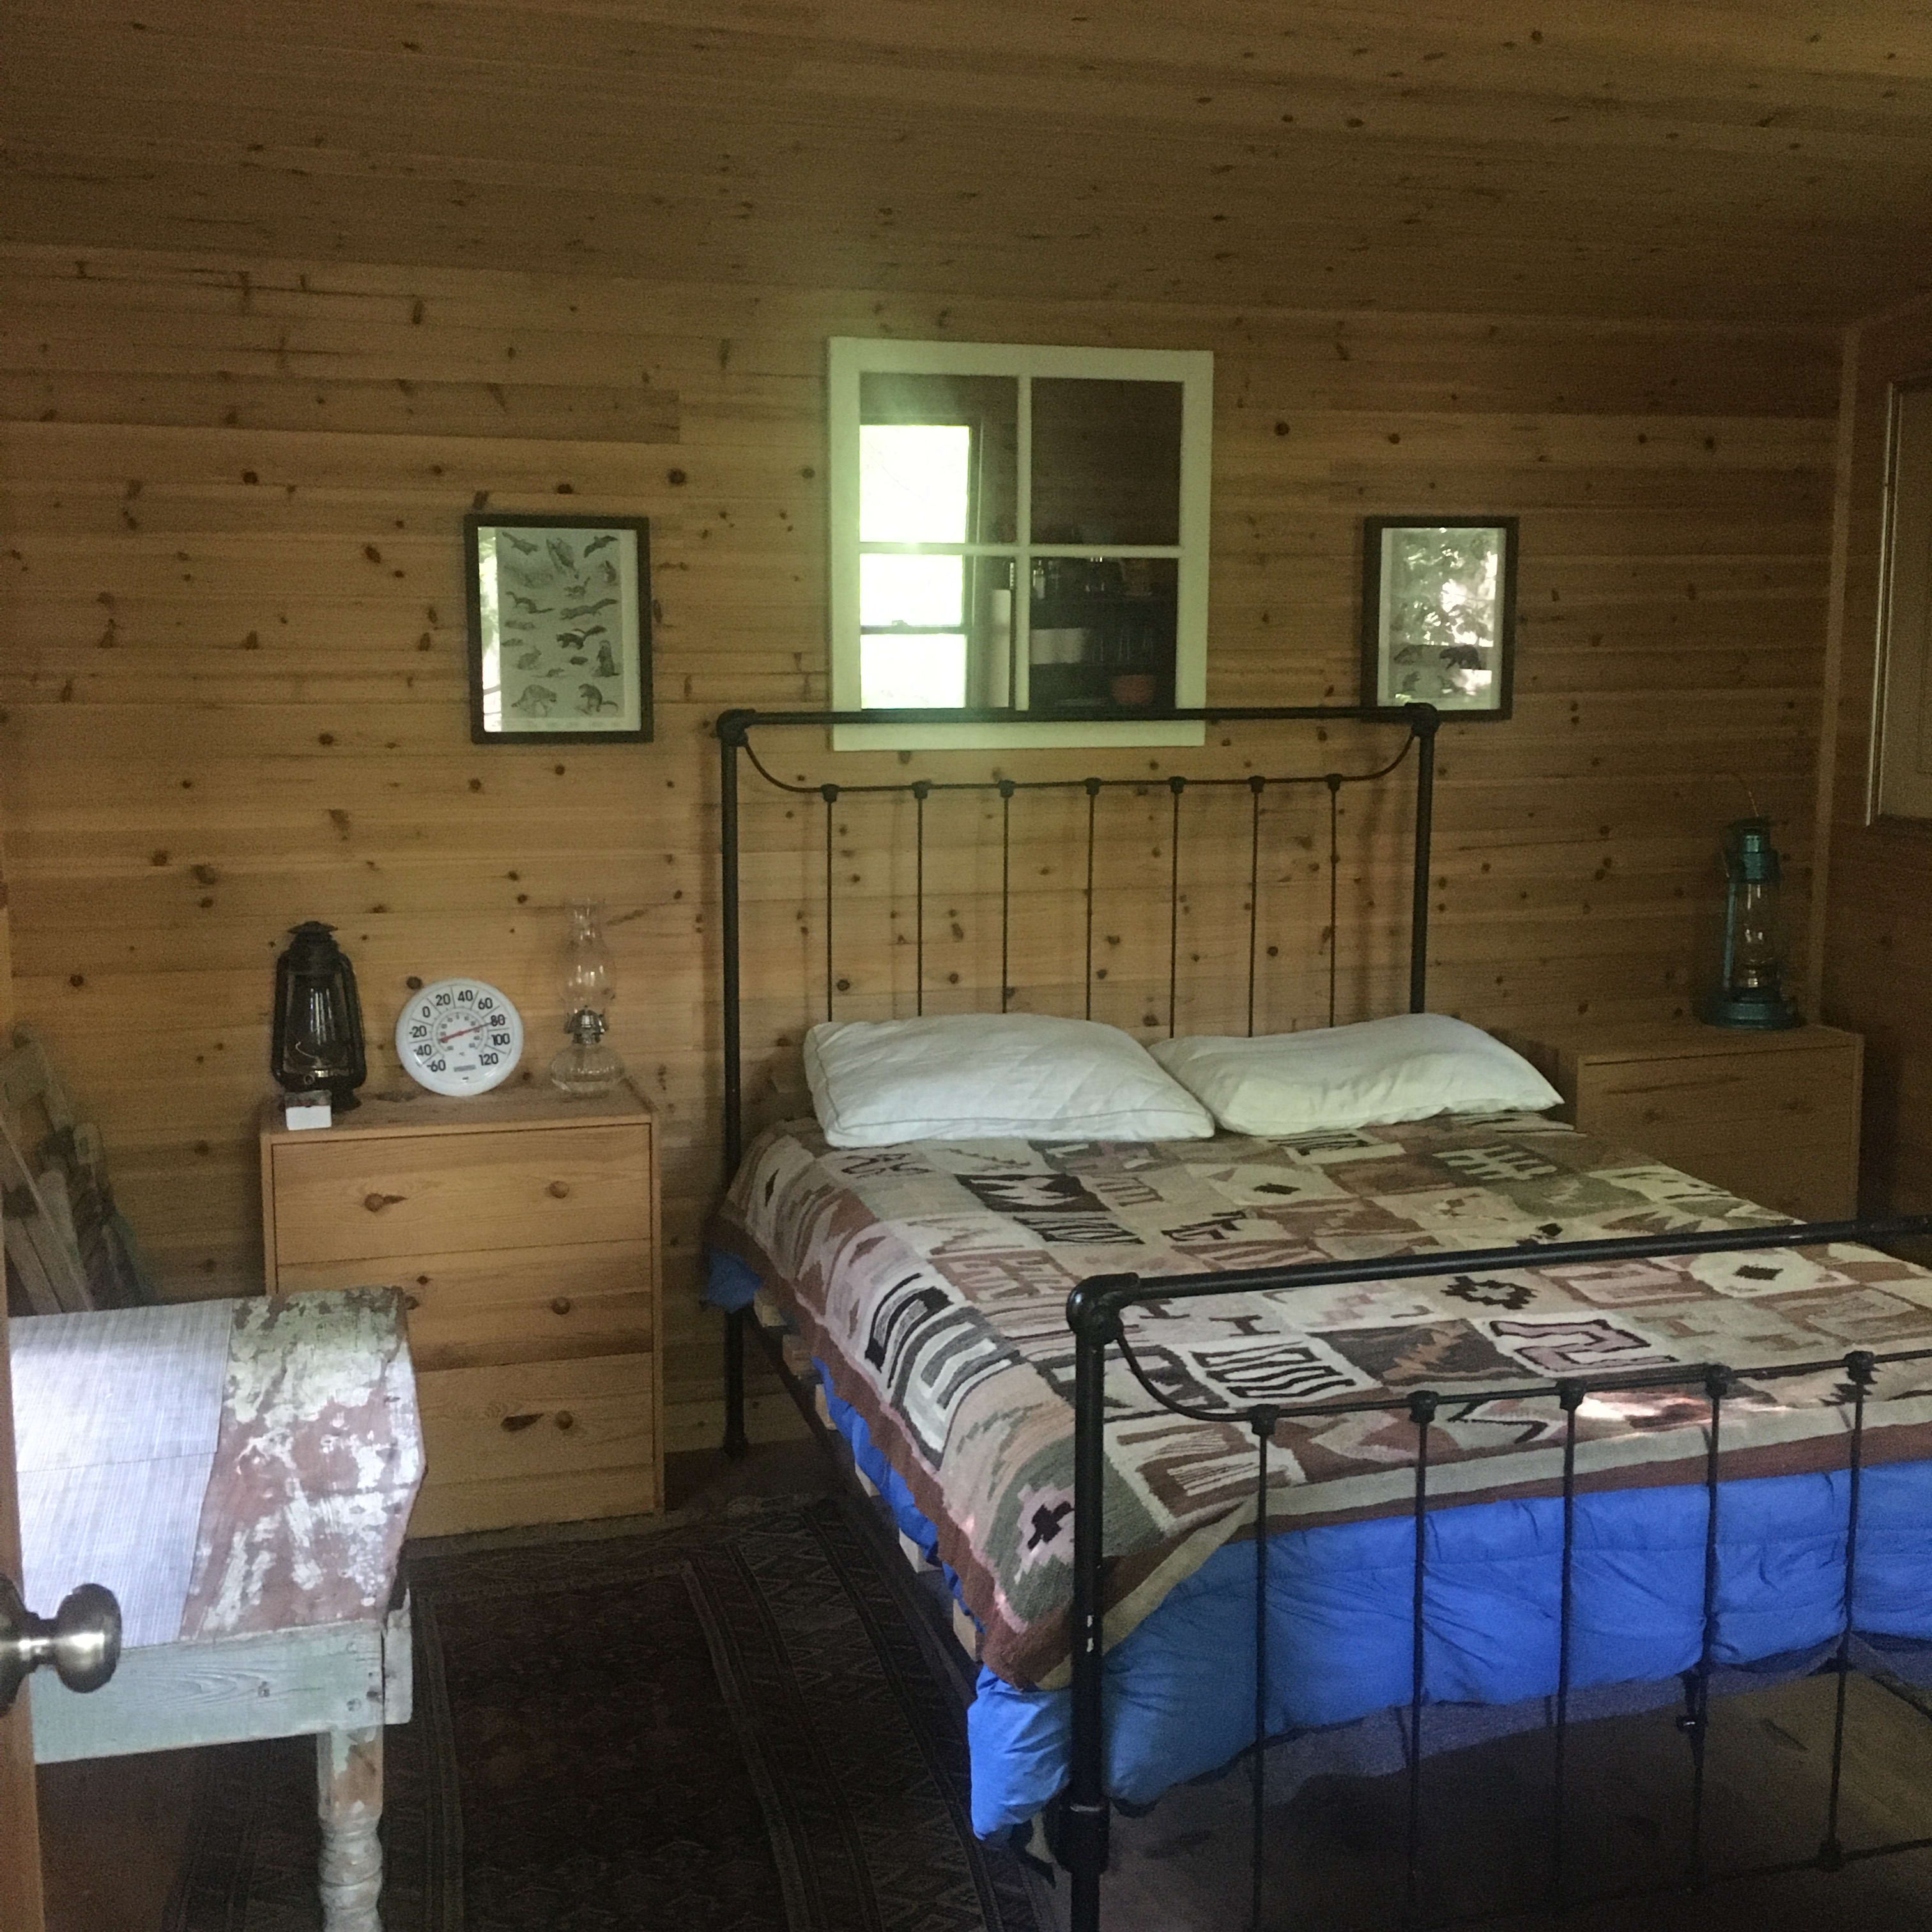 Inside of the cabin